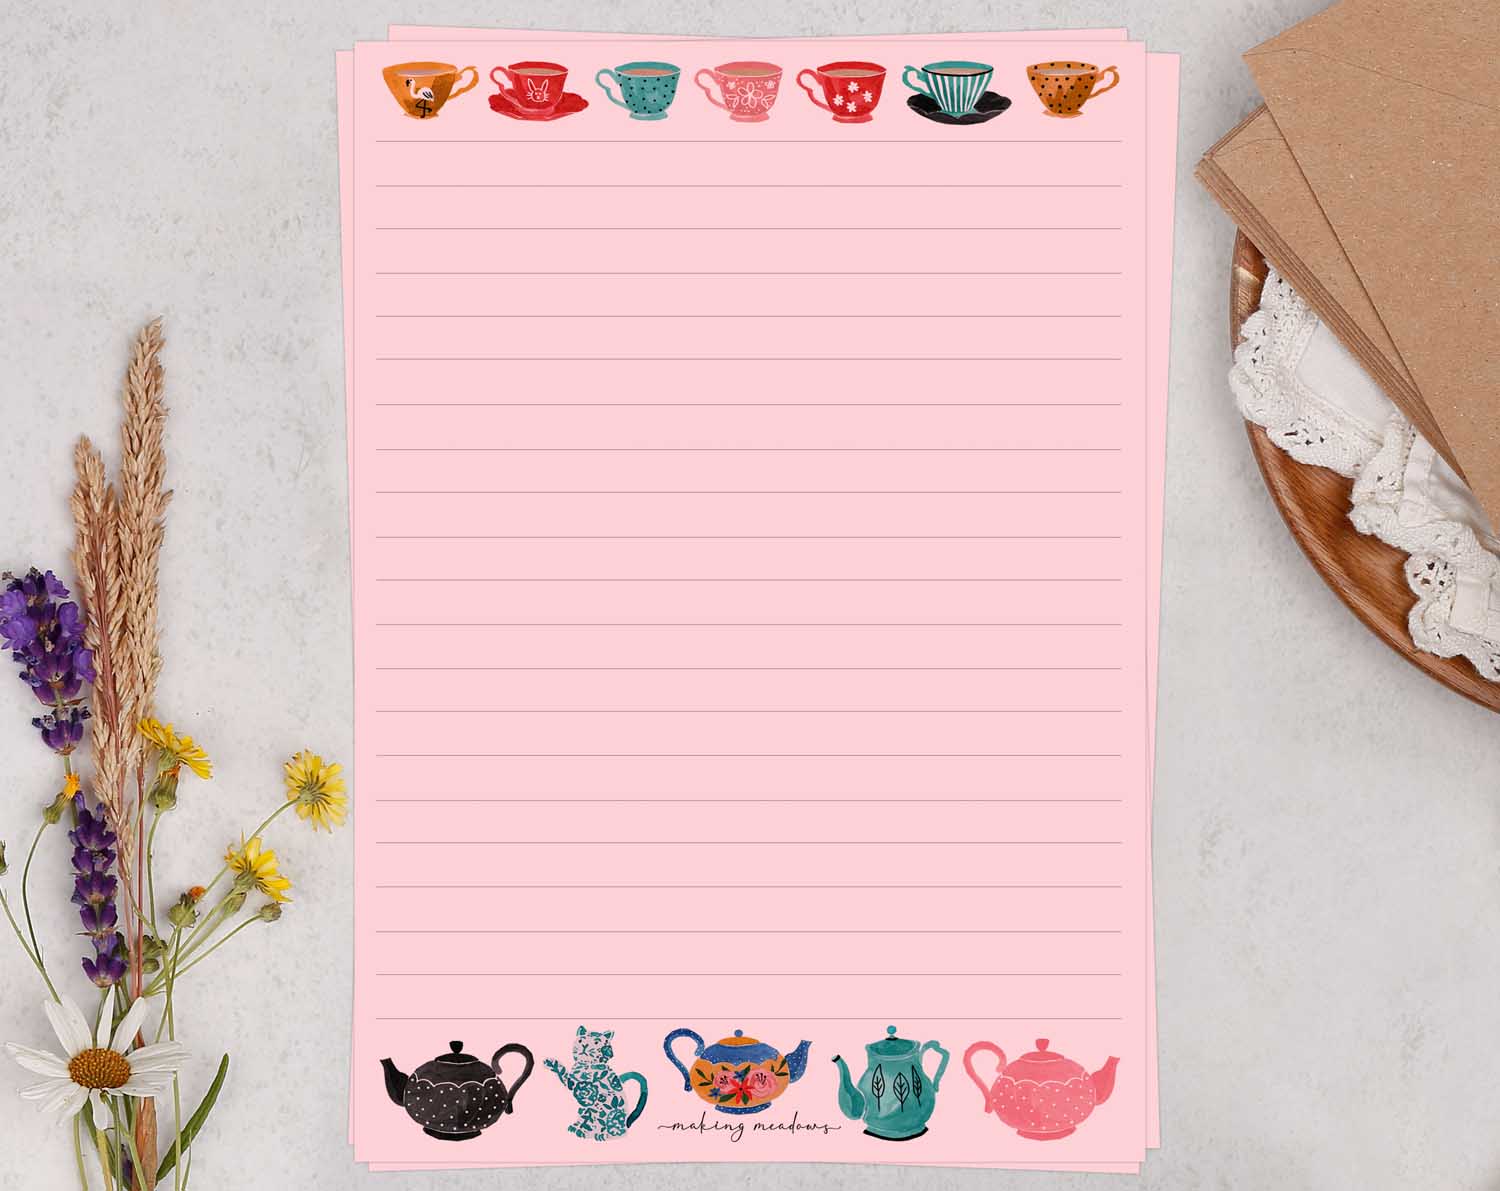 Pink A5 letter writing paper sheets adorned with vintage teapots or teacups.